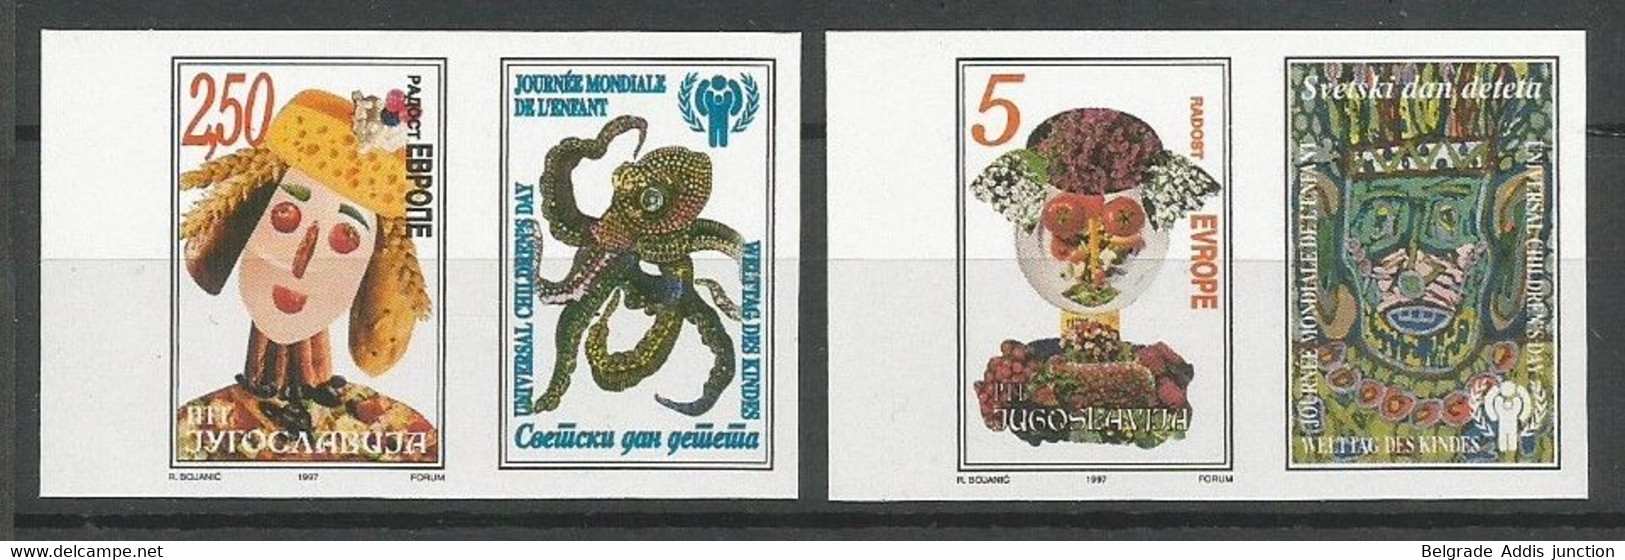 Yugoslavia Mi.2834/35 IMPERFORATED PROOF ESSAYS With LABELS Unadopted Design ** / MNH 1997 Europa Hang-on Issues RARITY! - Ongetande, Proeven & Plaatfouten